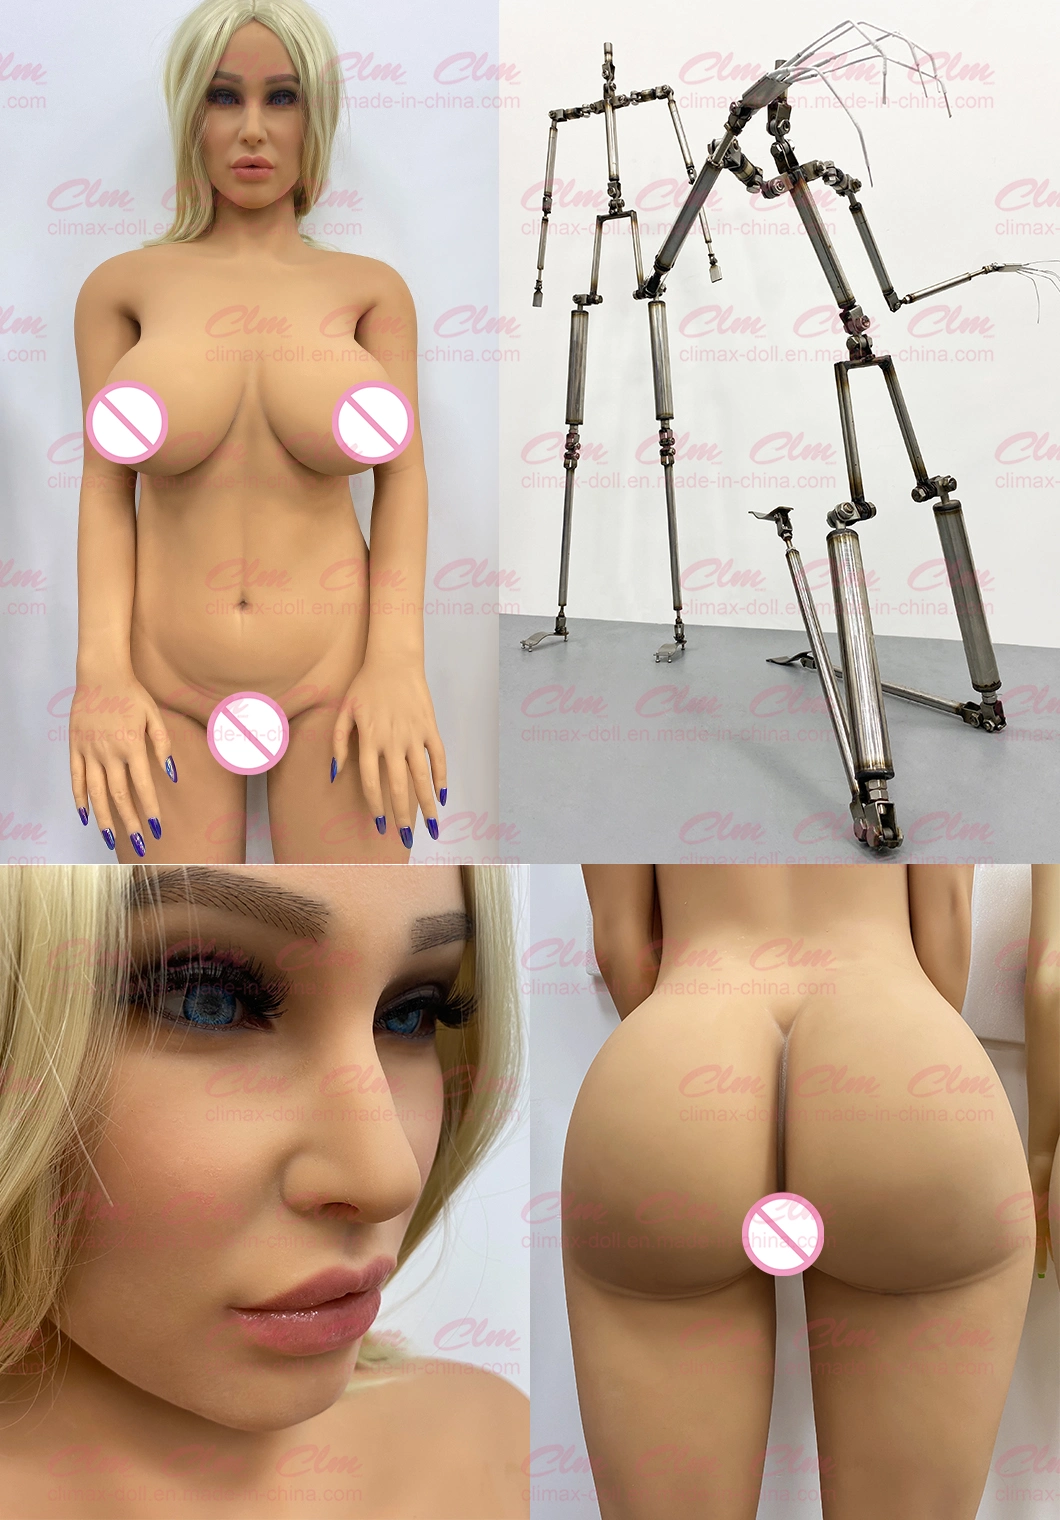 Clm (Climax doll) Hot Sale Big Breasts Adult Toy Silicone Full Body Realistic Sex Products